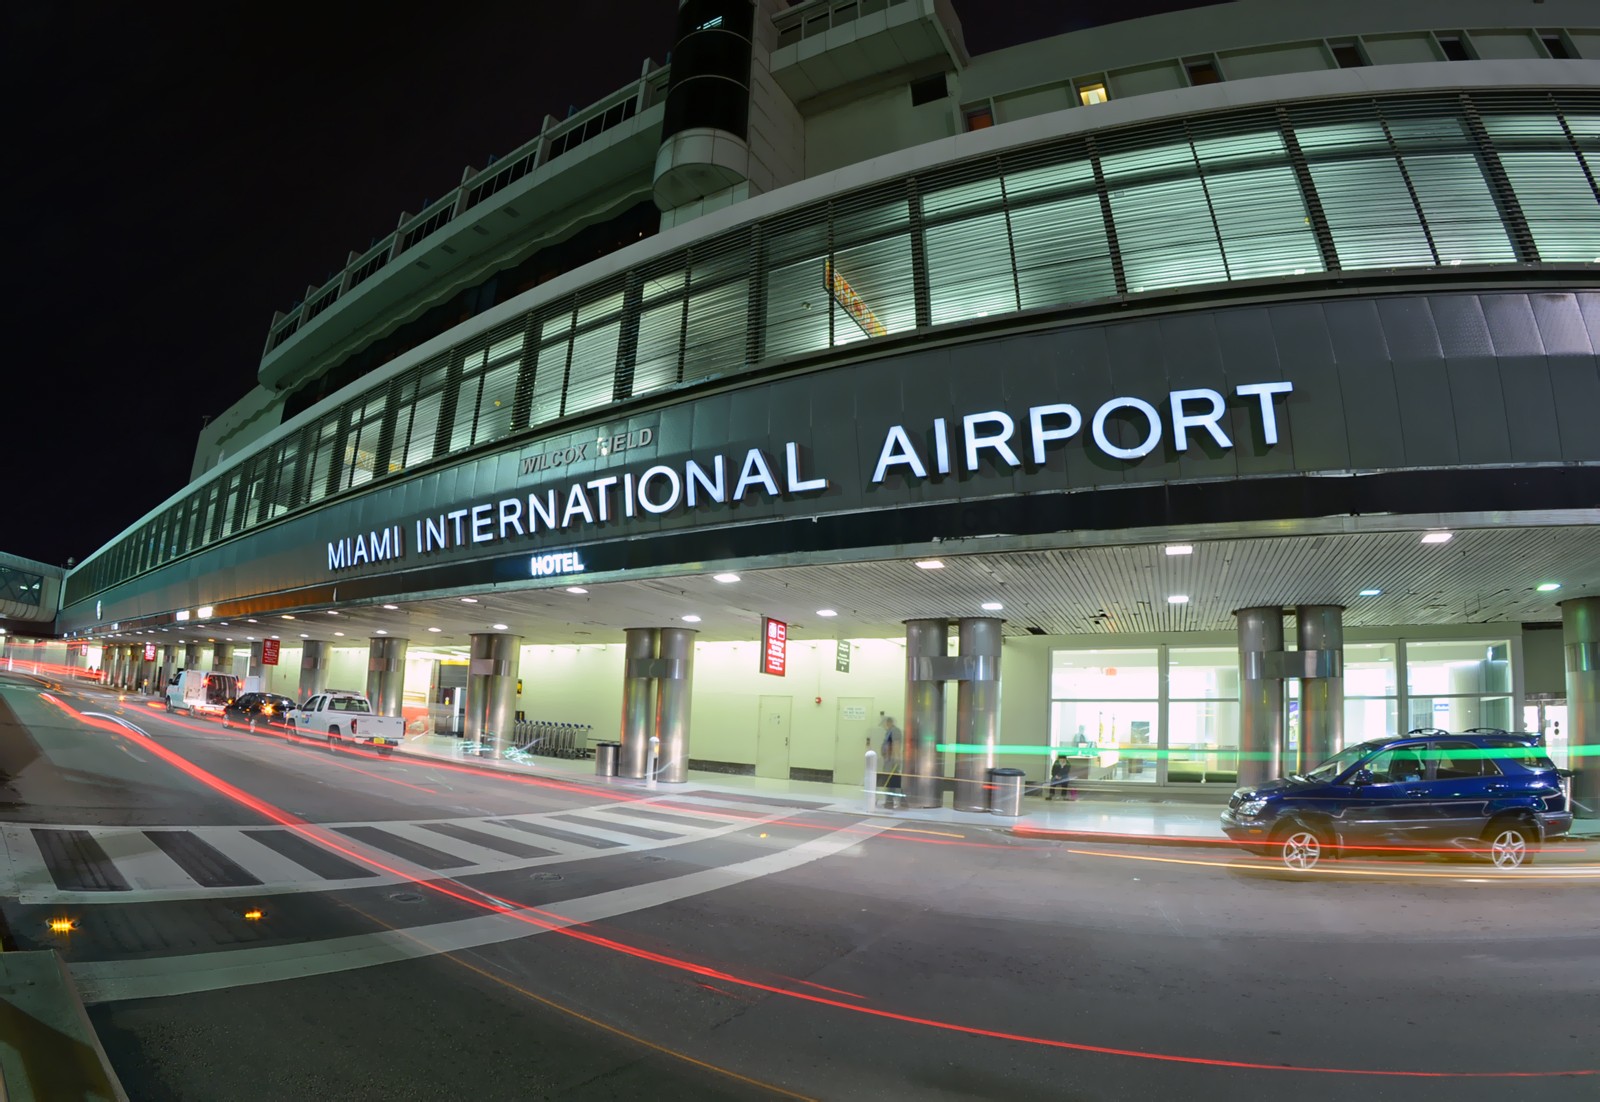 Final Vote to Approve $5 Billion in Funding to Miami International Airport Expansion will Happen Next Week